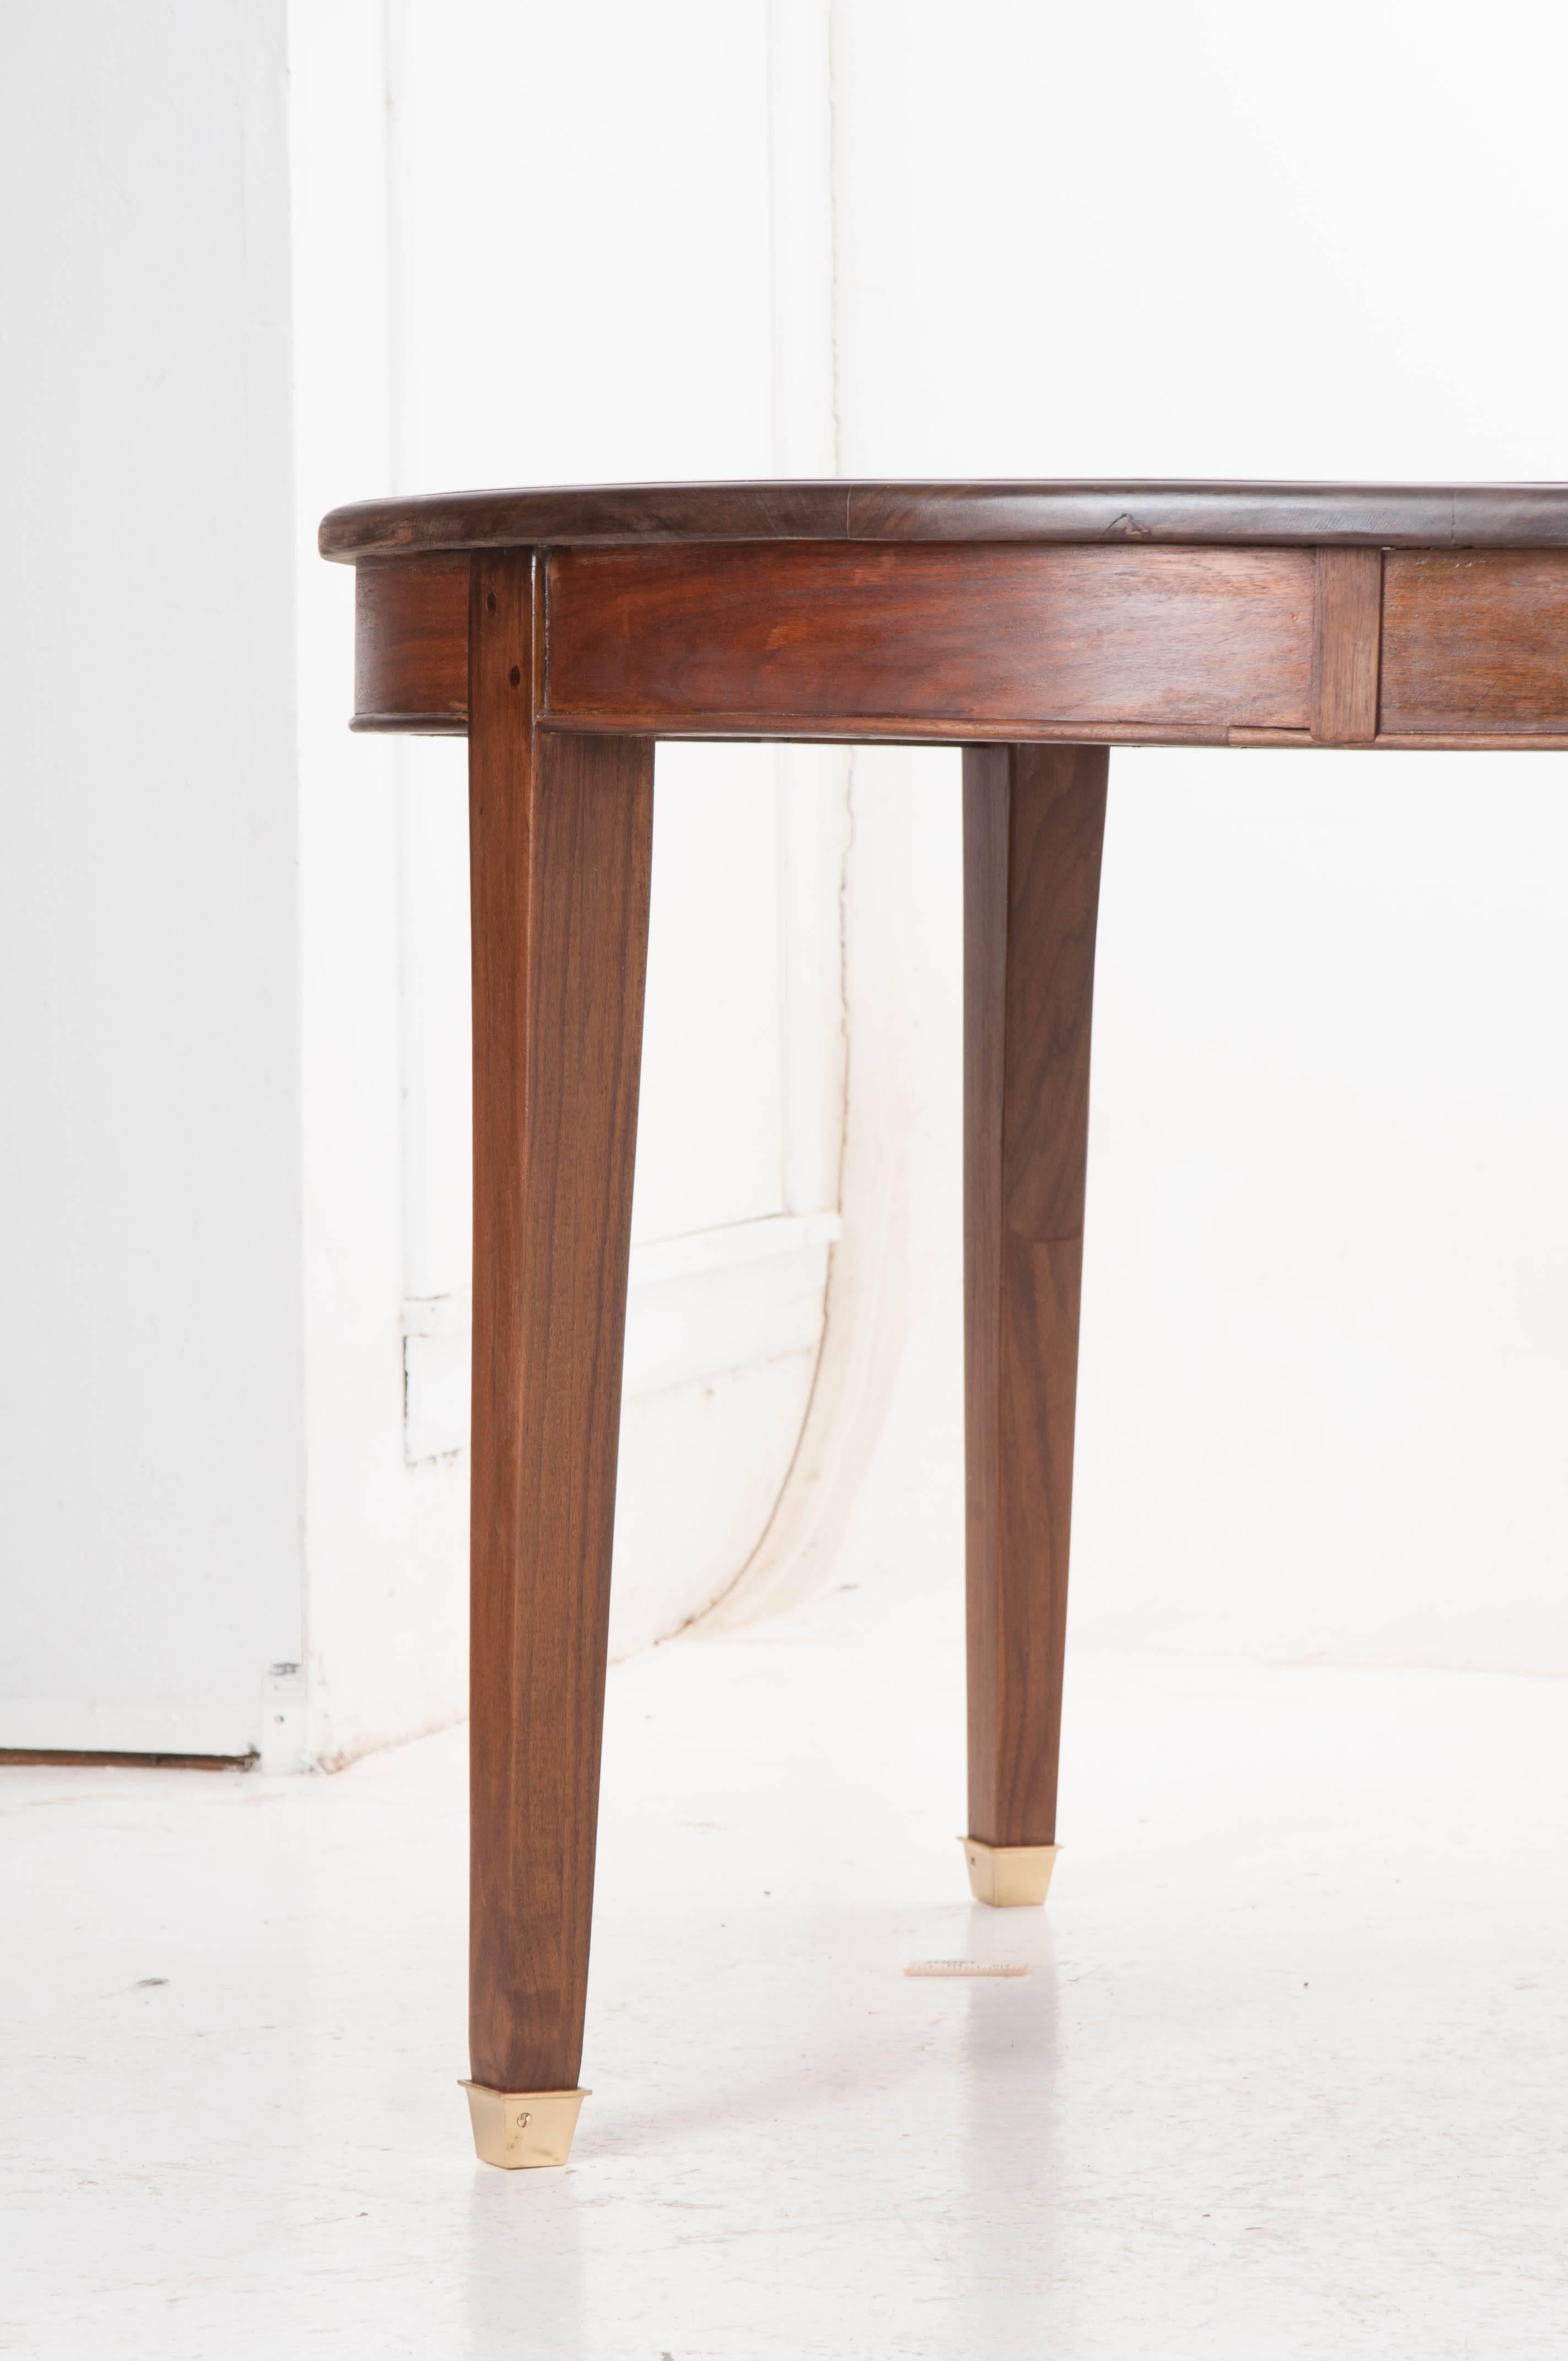 American French Directoire Style Walnut Dining Table Made at Fireside